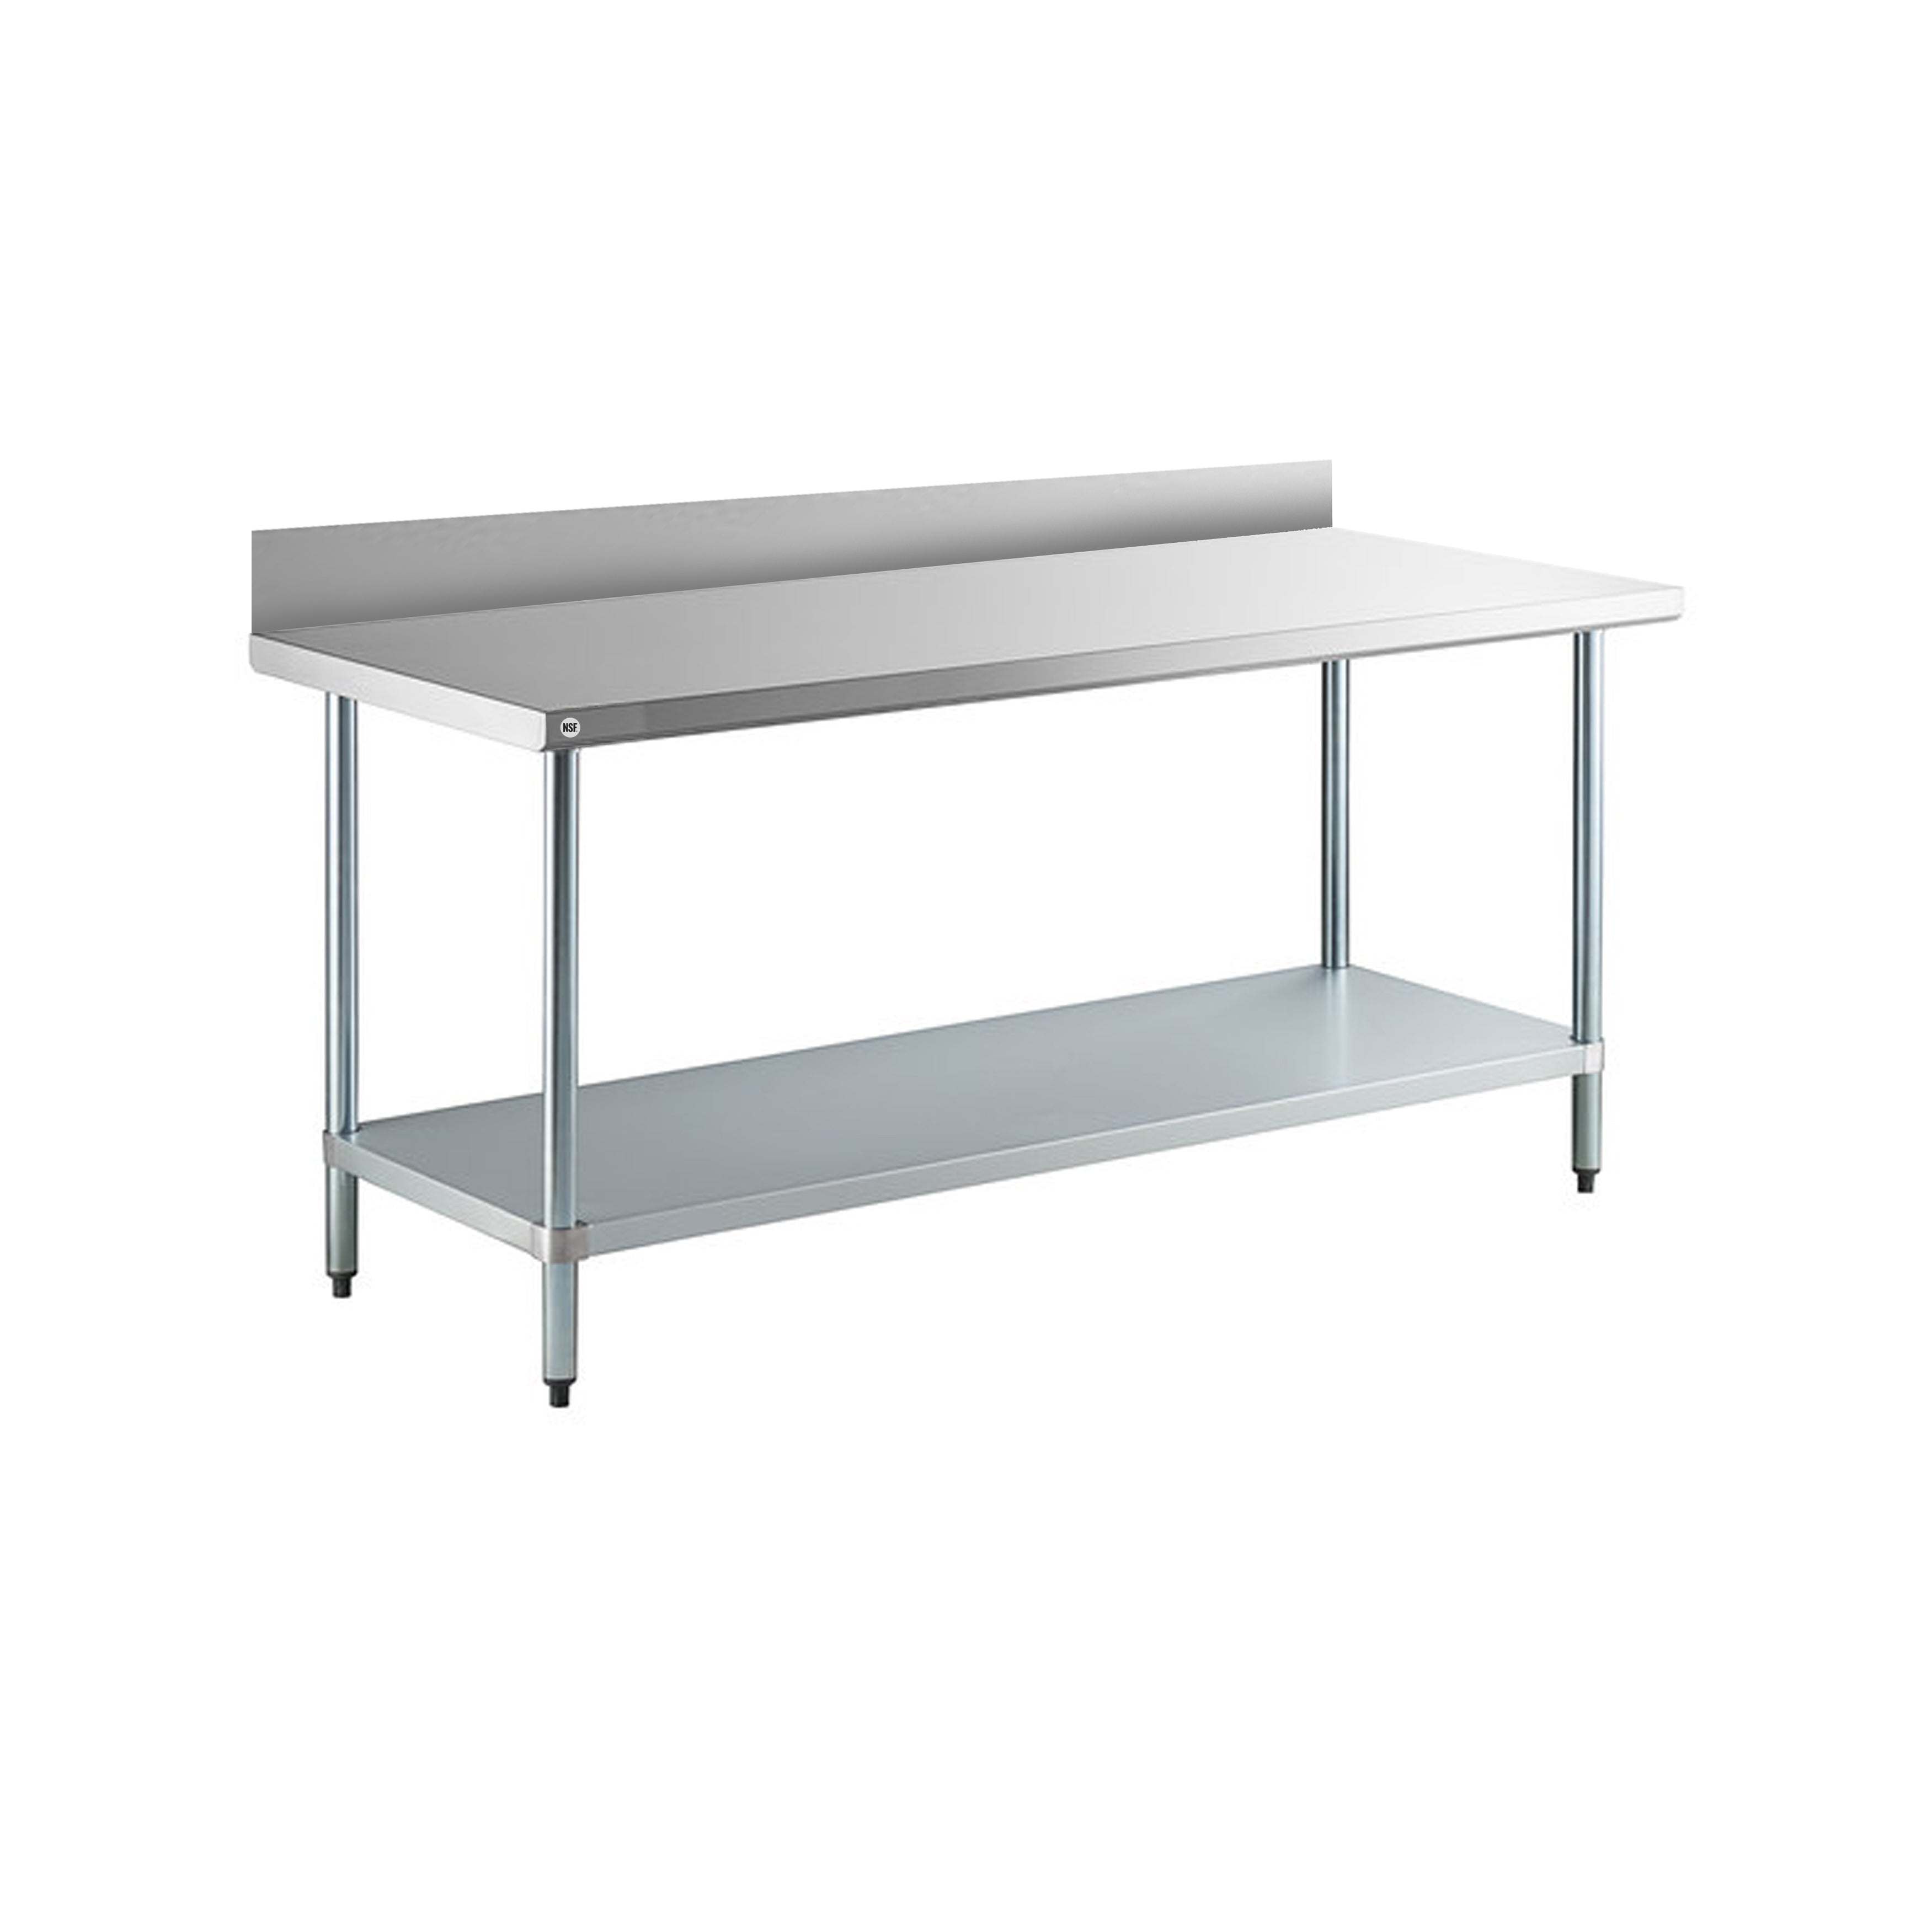 Omcan - 23795, Commercial 36" x 24" Stainless Steel Kitchen Work Table with 4" Back Splash 900lbs Medium Duty